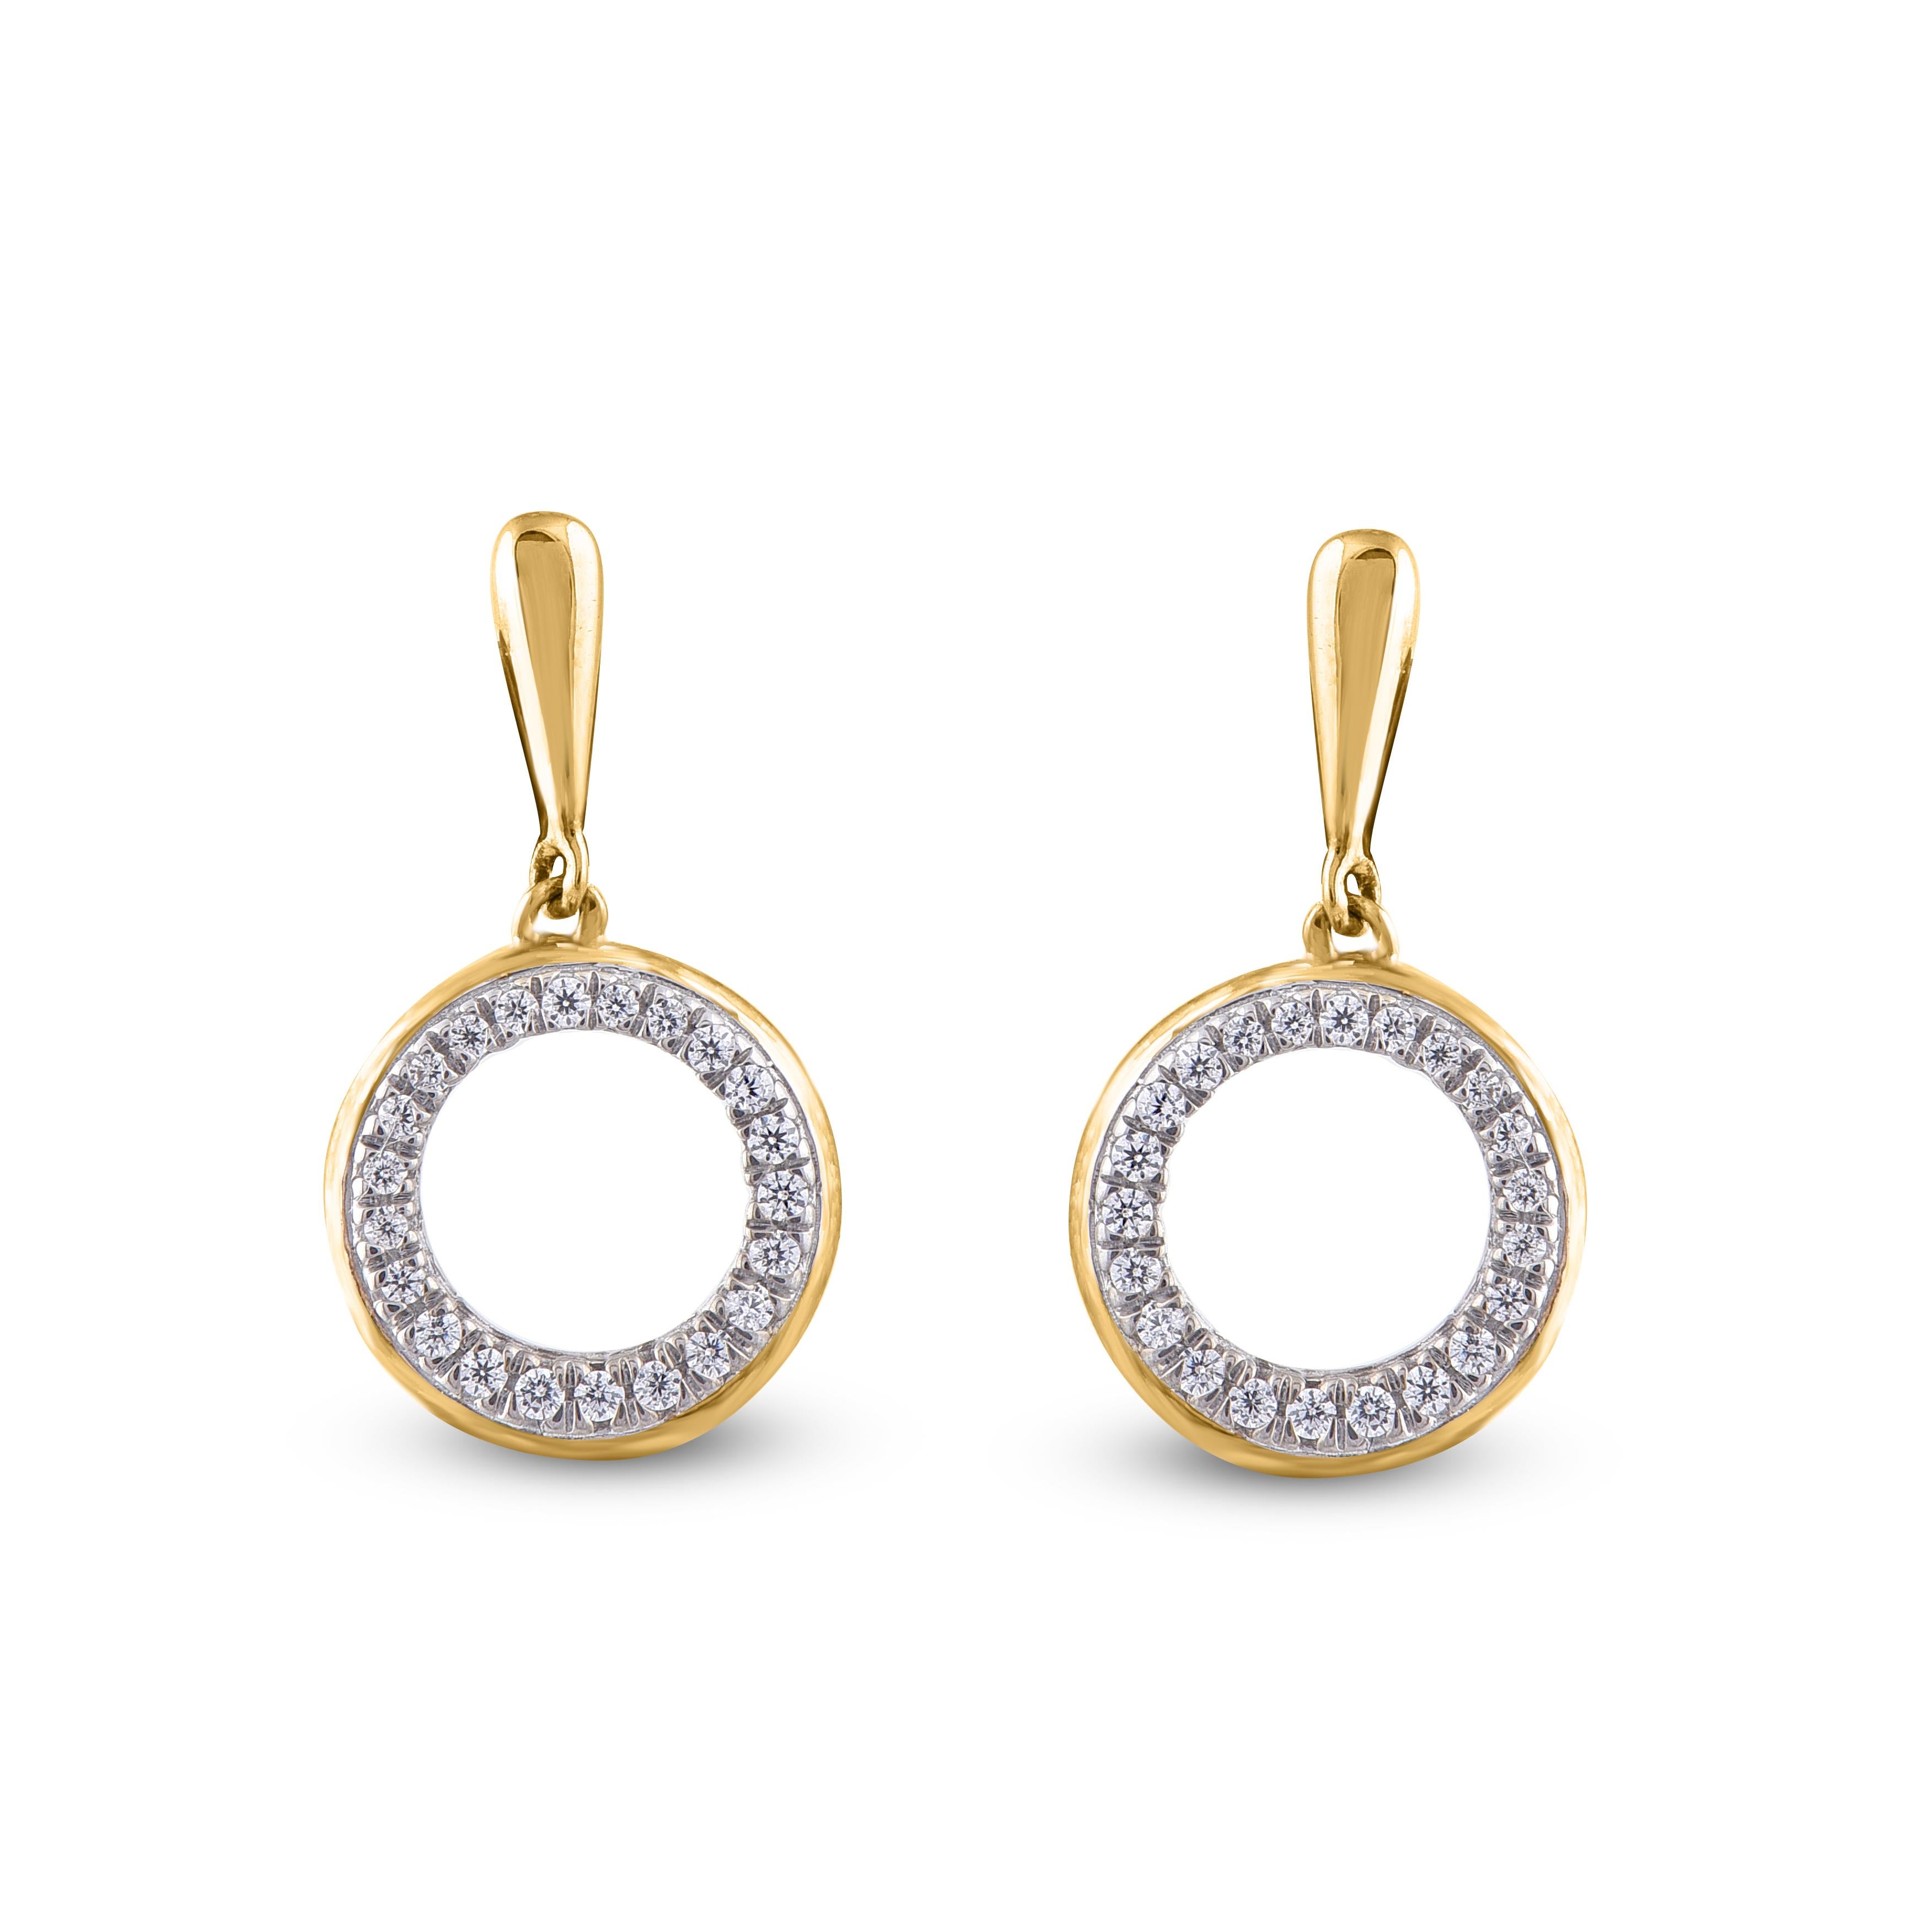 The perfect complement to her classic style, this diamond drop earrings shines with your happily ever after. These earrings feature dazzling with 44 round diamond set in prong setting. These earrings top post settings that secure comfortably with